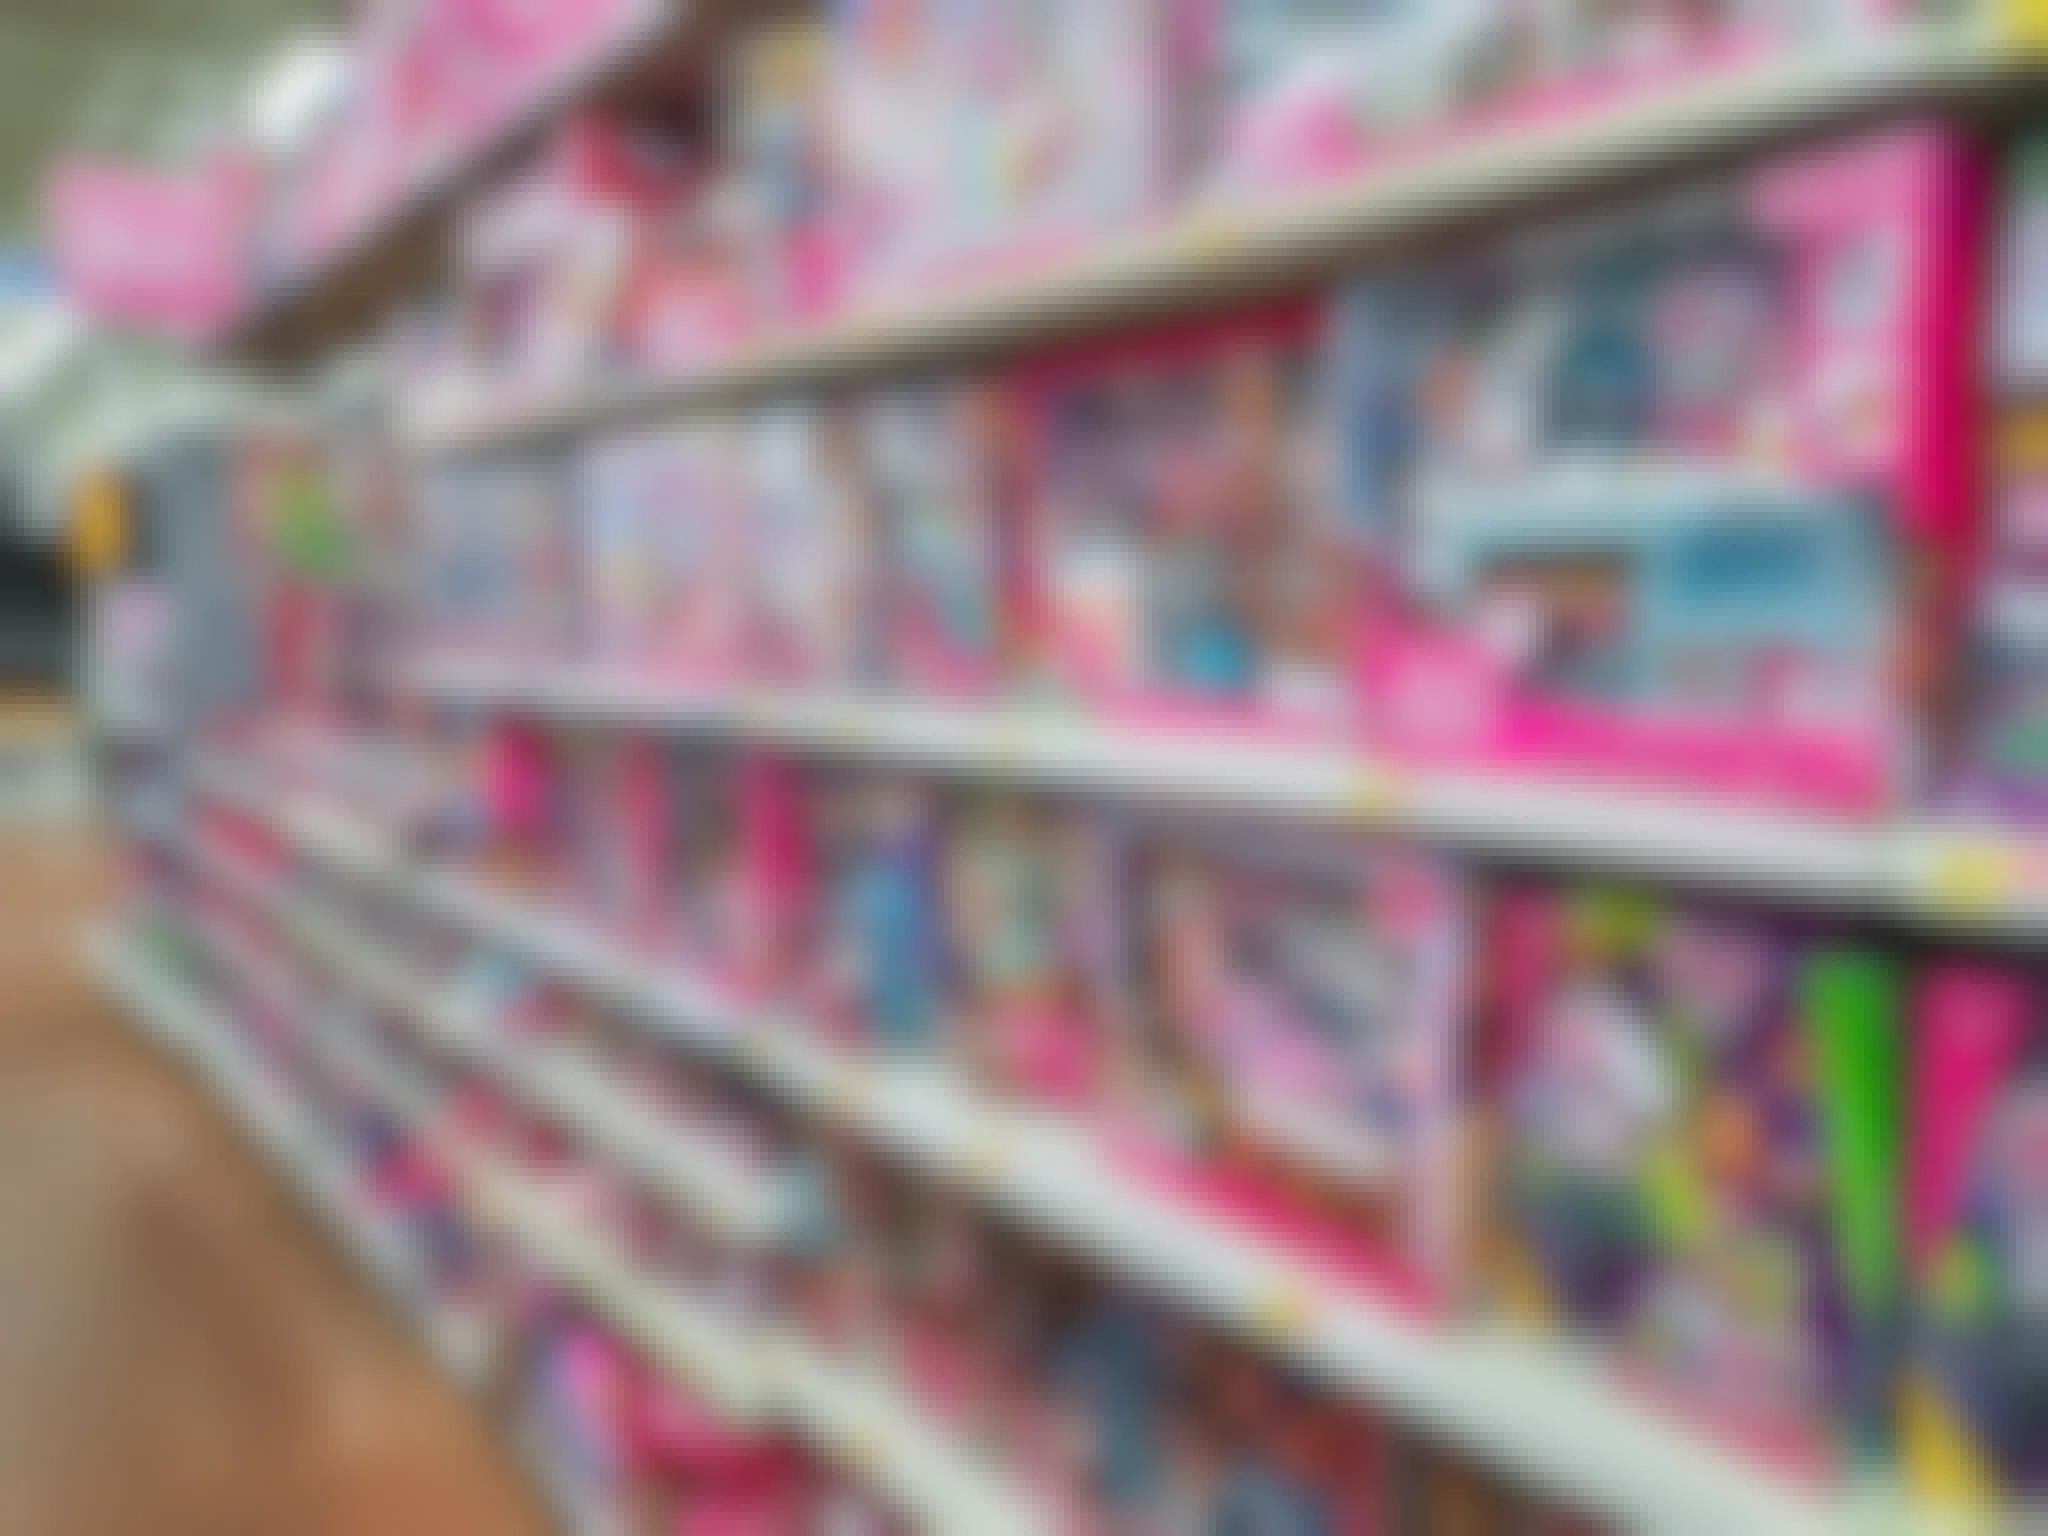 Barbie Doll Playsets, as Low as $13.97 at Walmart